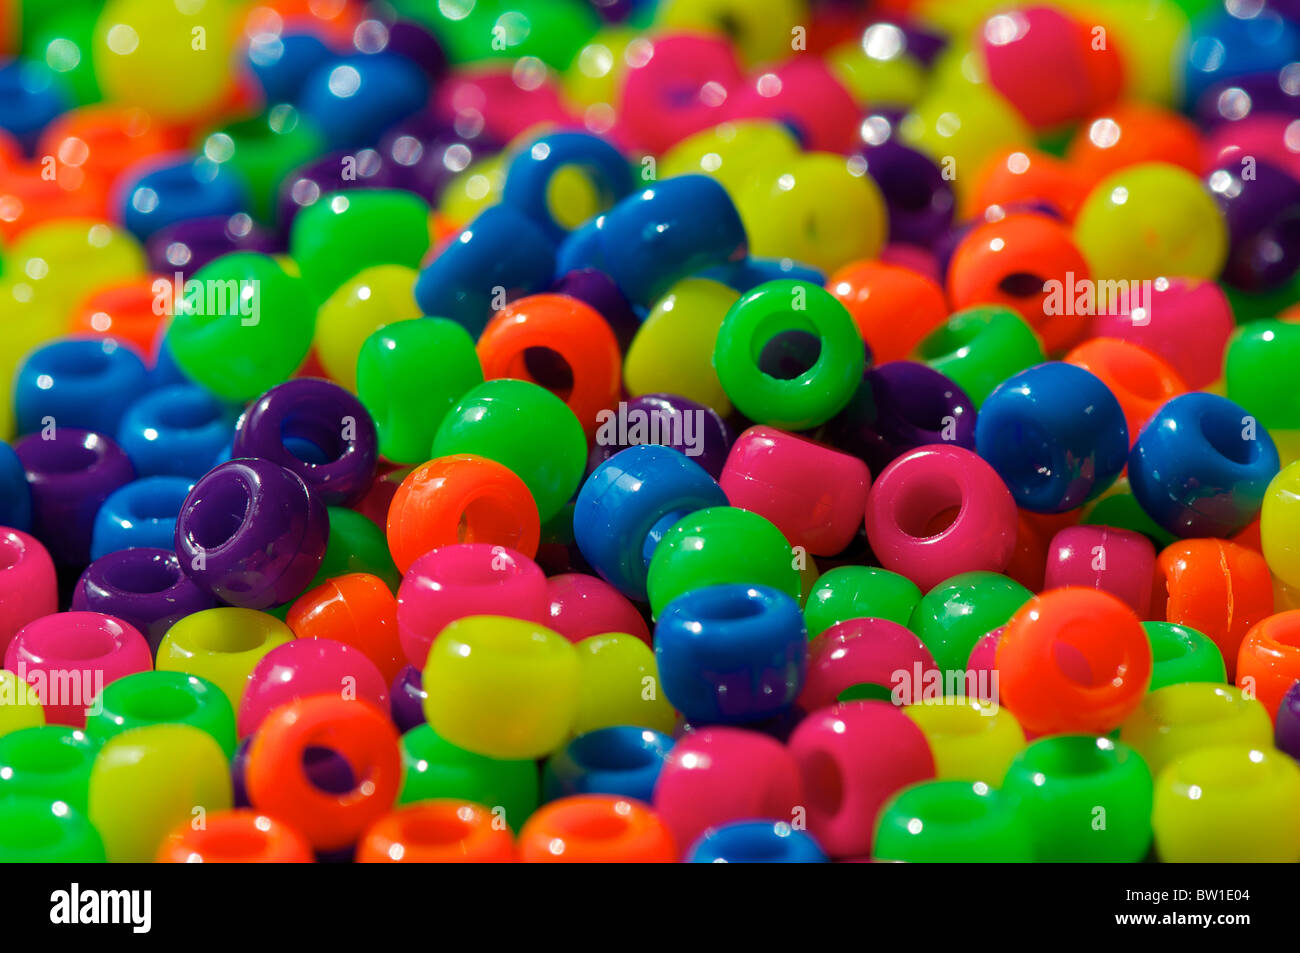 Pile of brightly coloured beads close-up Stock Photo